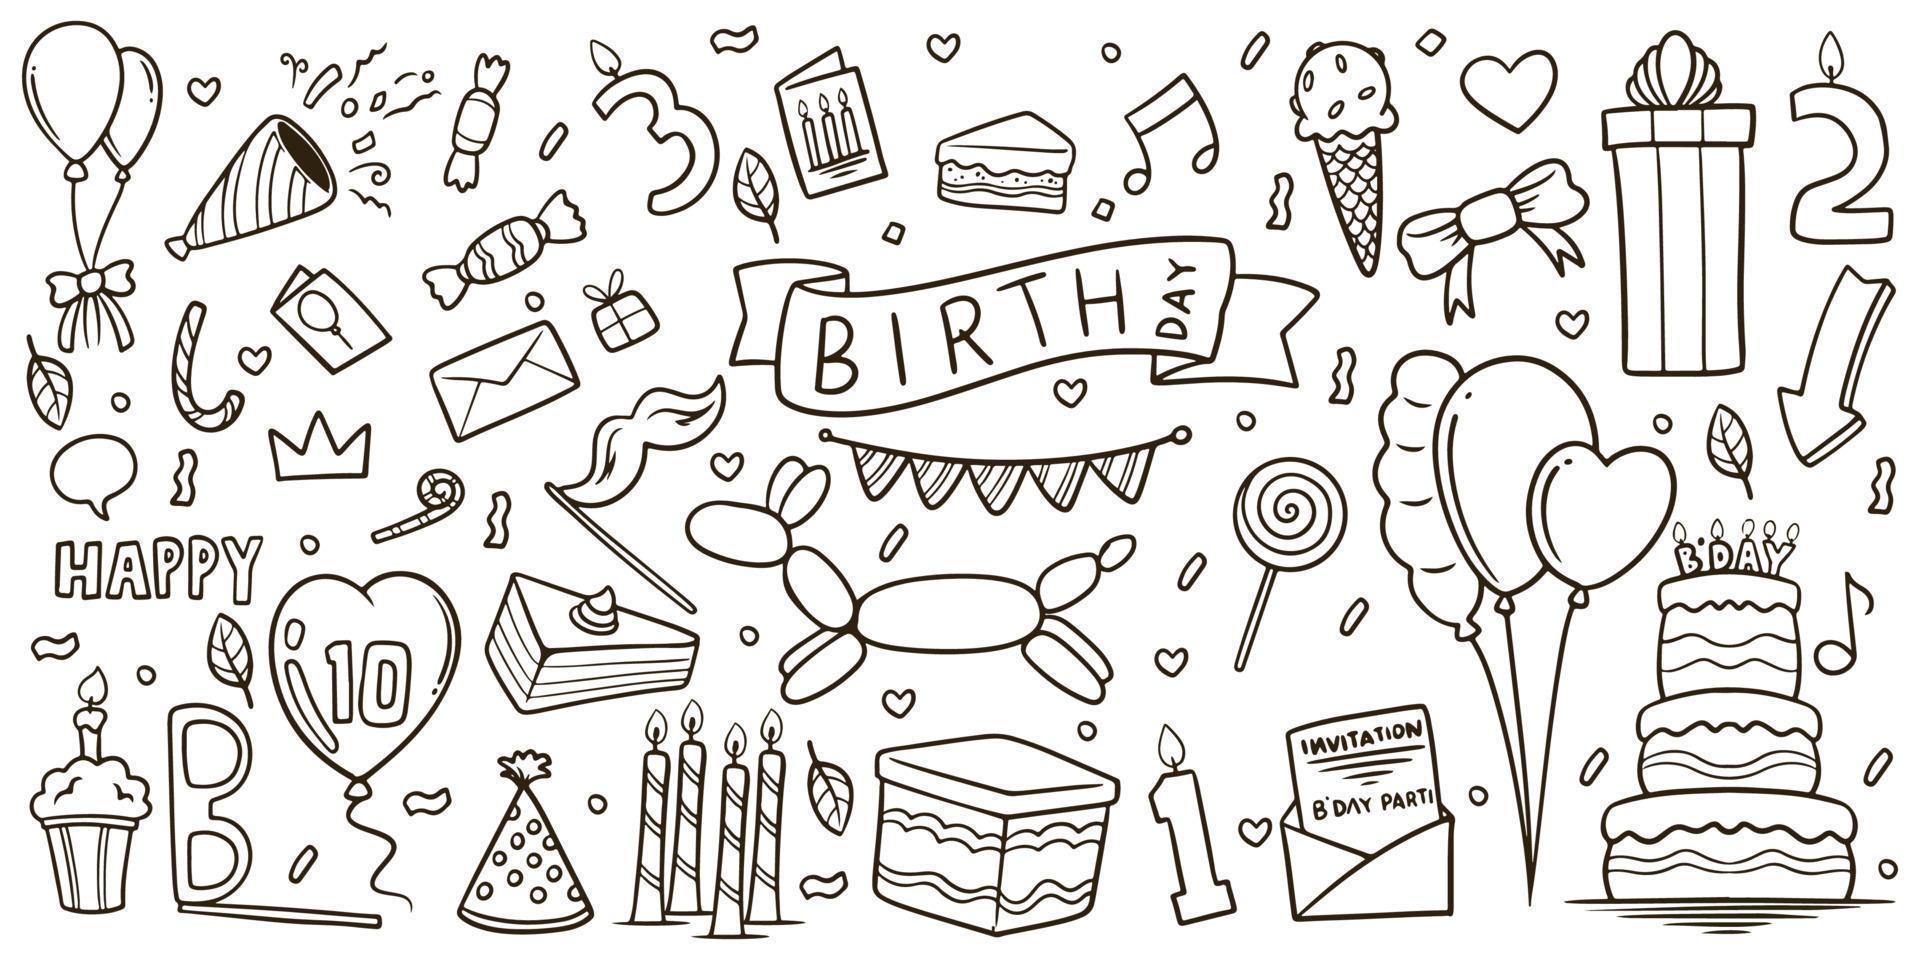 Hand drawn birthday equipments elements doodle set on white background vector